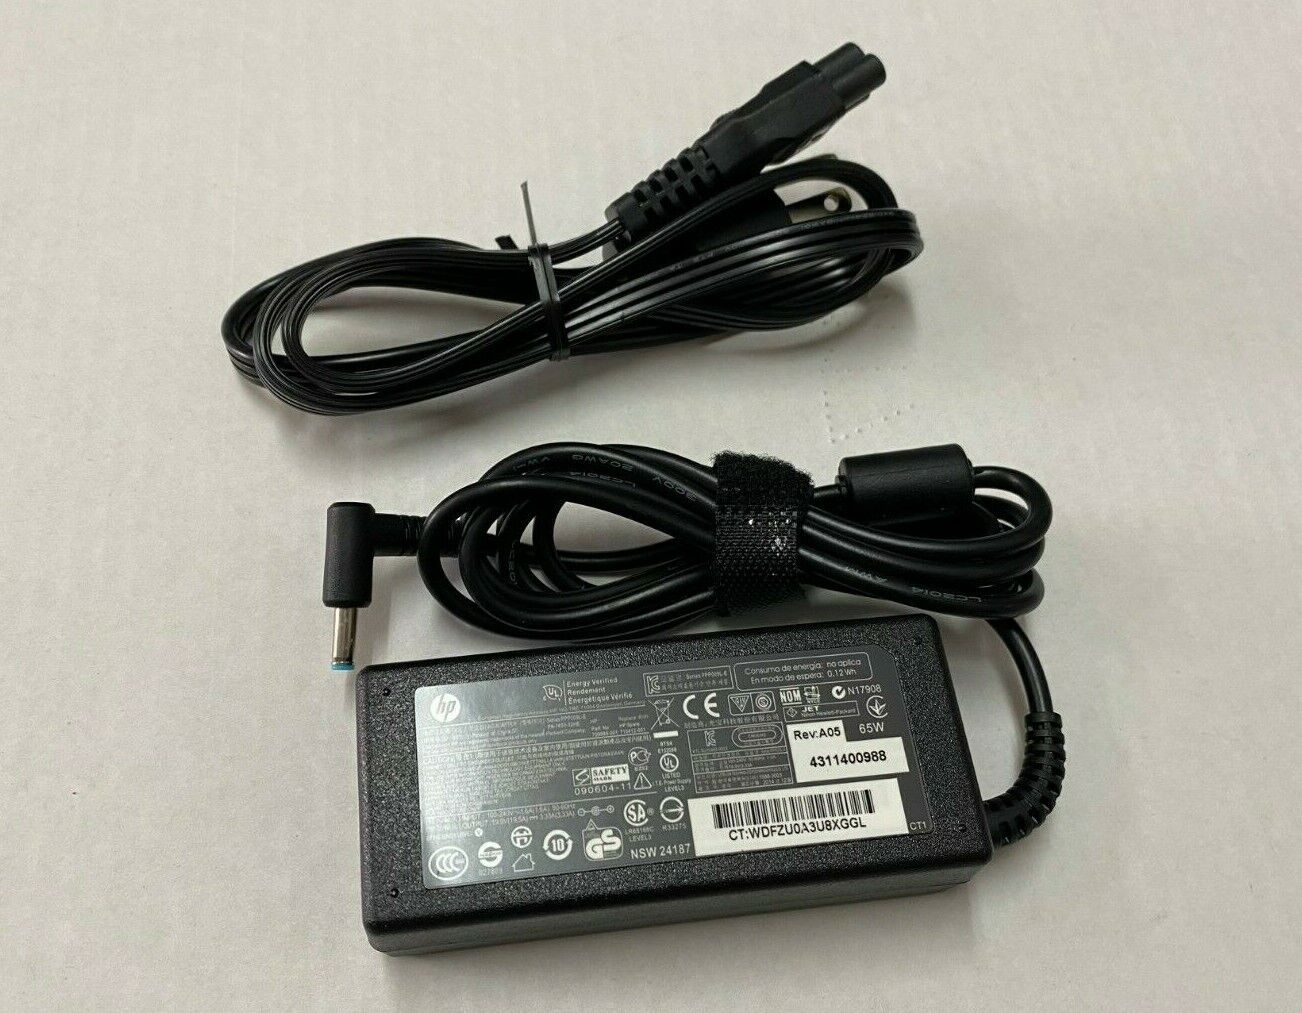 New OEM Genuine HP ProBook 430-G5 440-G5 450-G5 470-G5 65W Power Adapter Charger